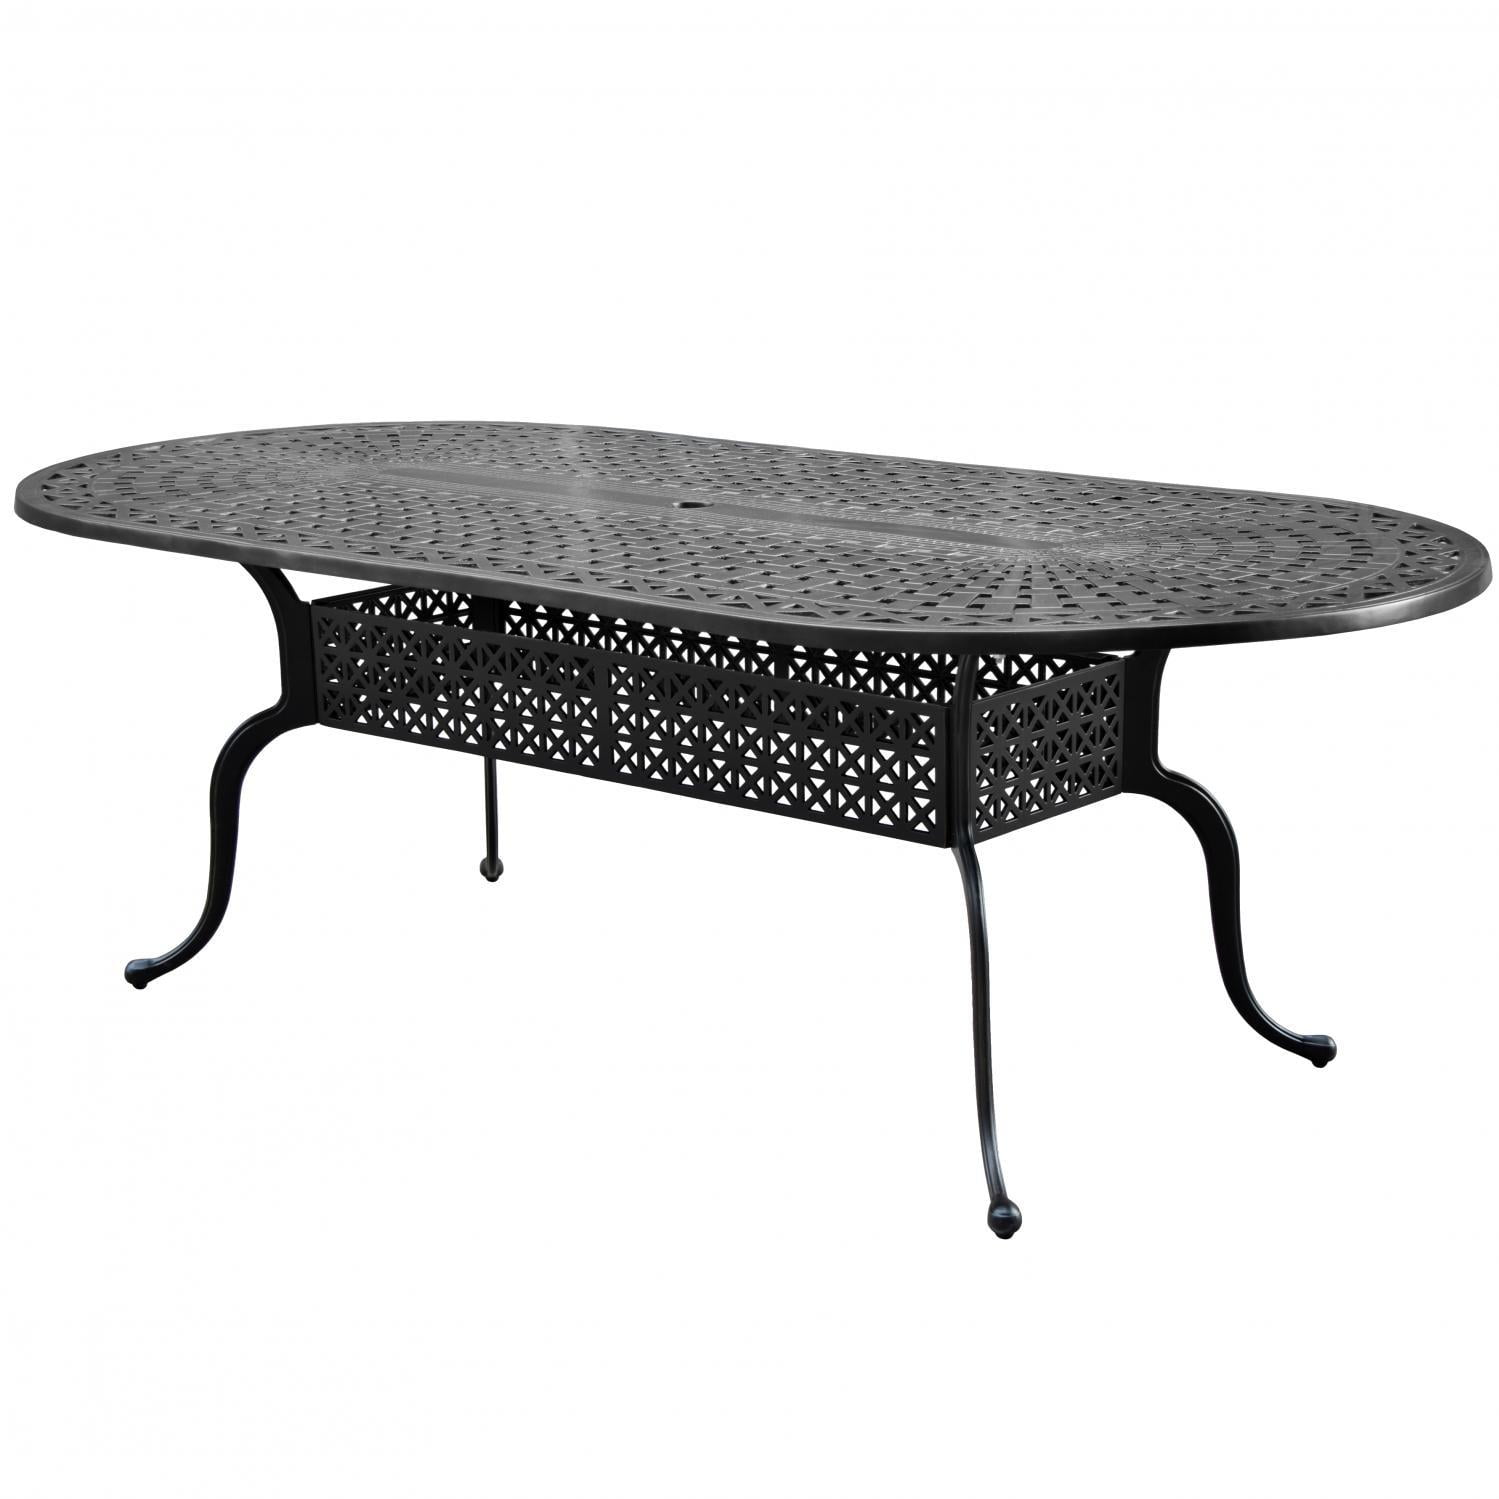 Classique 84 X 42 Inch Oval Cast Aluminum Patio Dining Table By